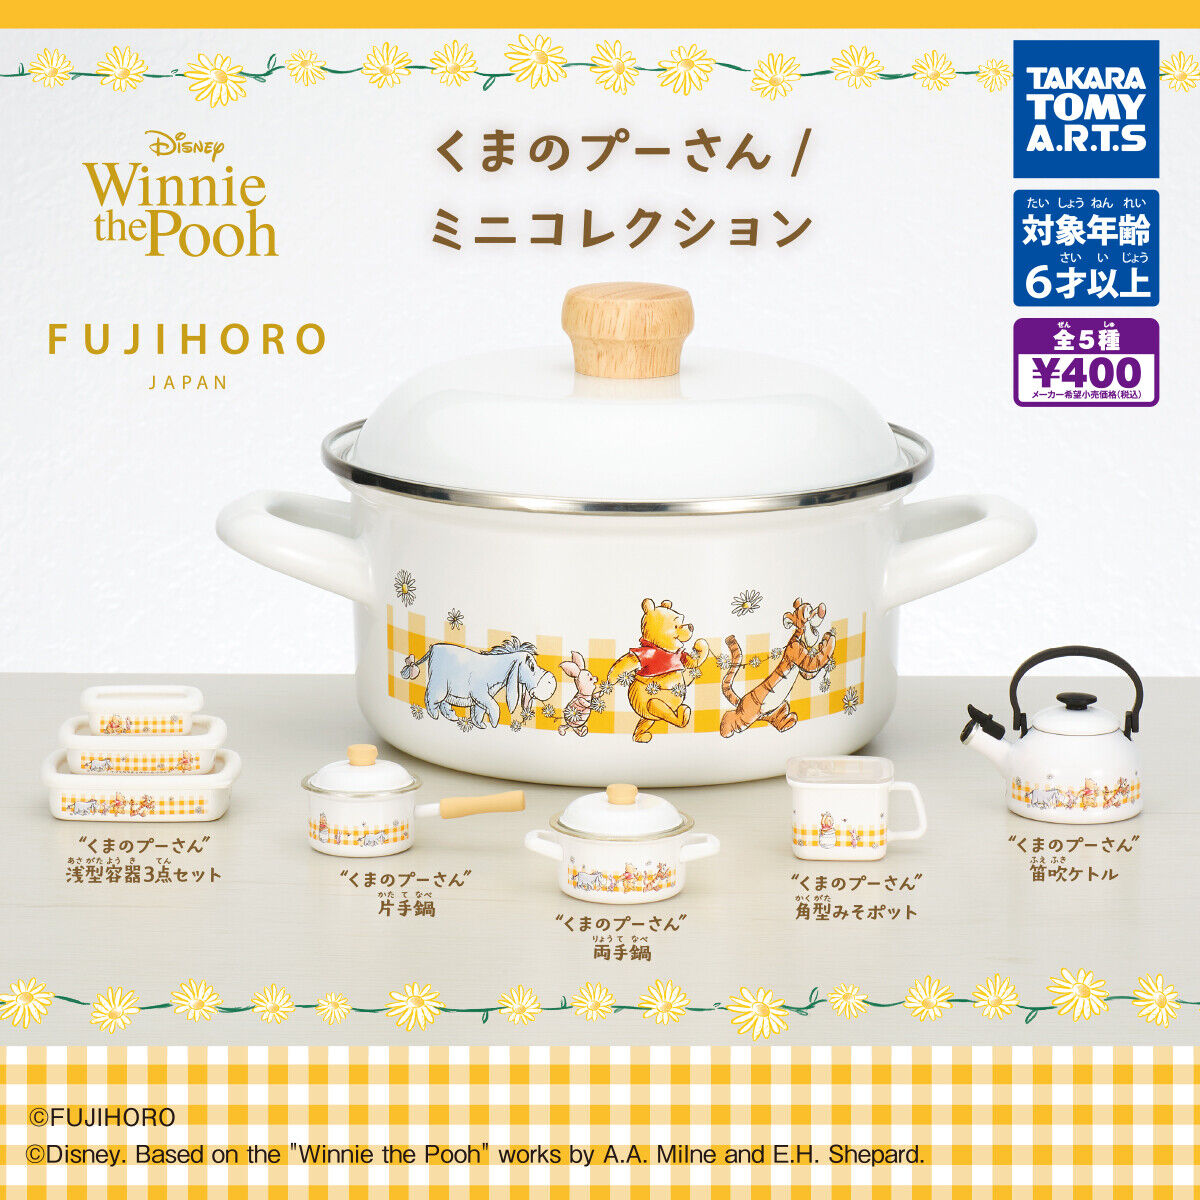 FUJIHORO Winnie the Pooh Mini Collection Kitchen Set Complete Set of 5 Types